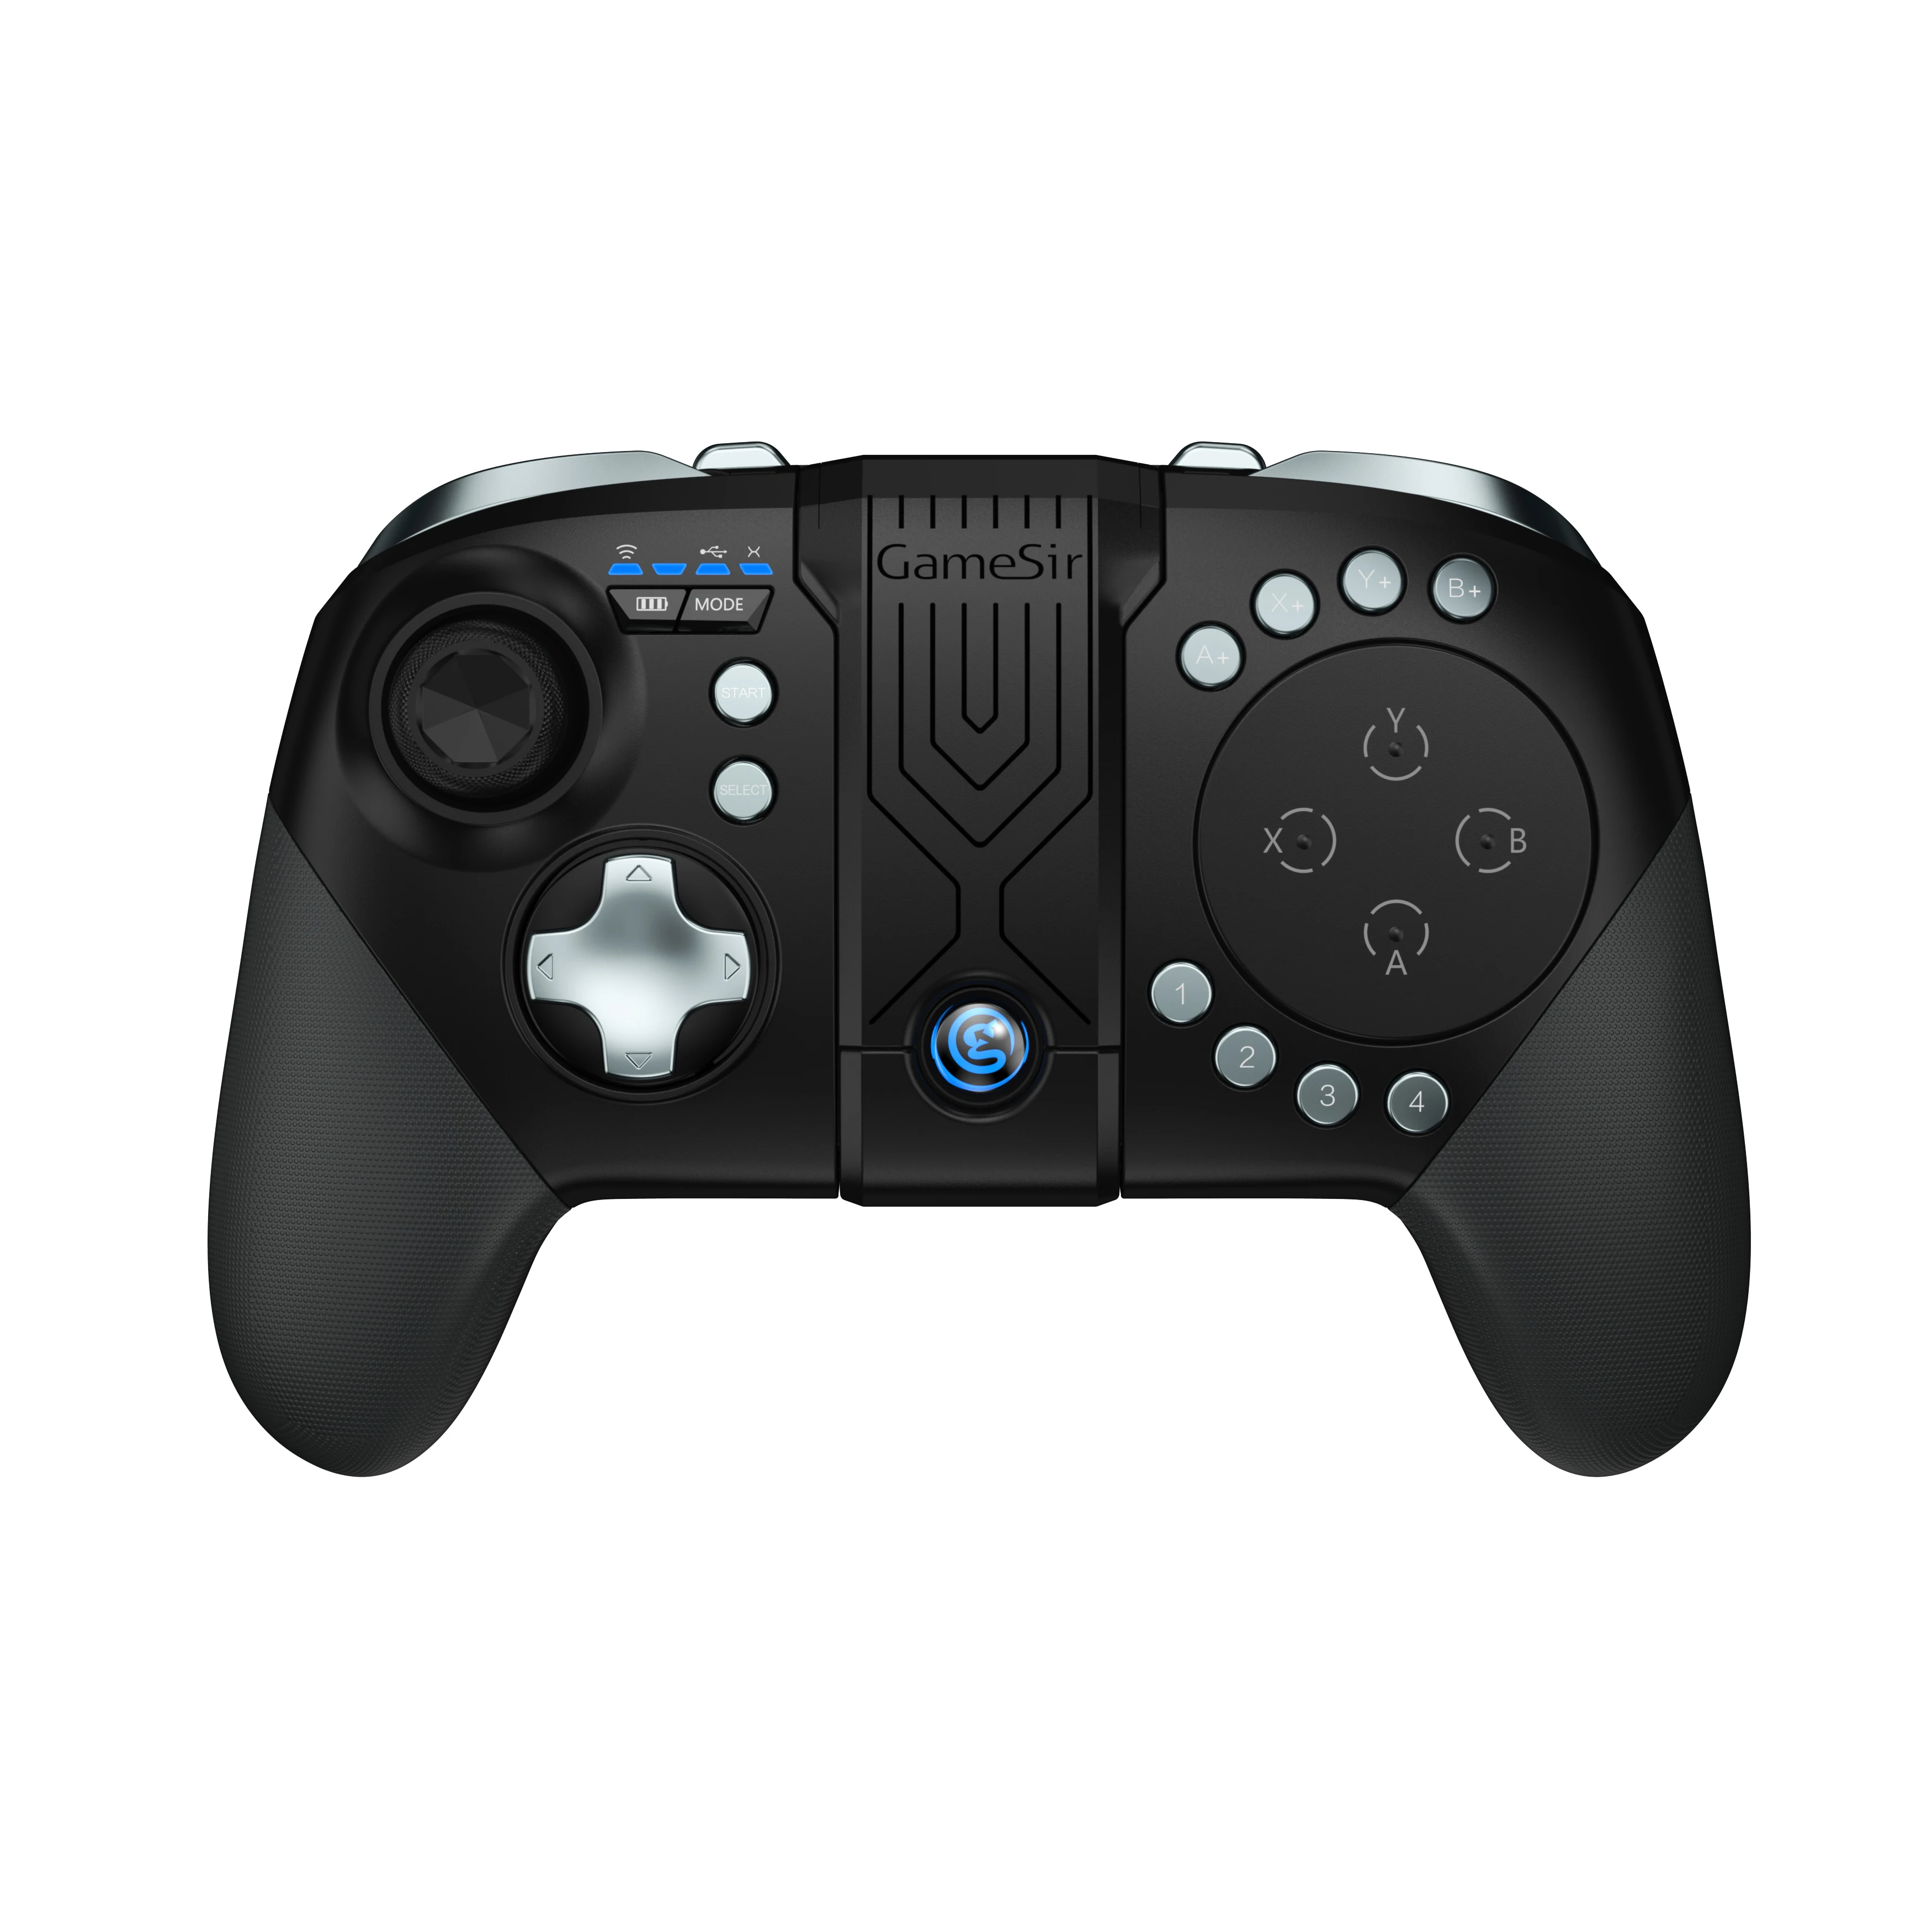 

GameSir G5 Bluetooth 5.0 Gamepad pubg mobile Controller Wireless Trackpad Touchpad with Bracket Joystick for Android fortnite